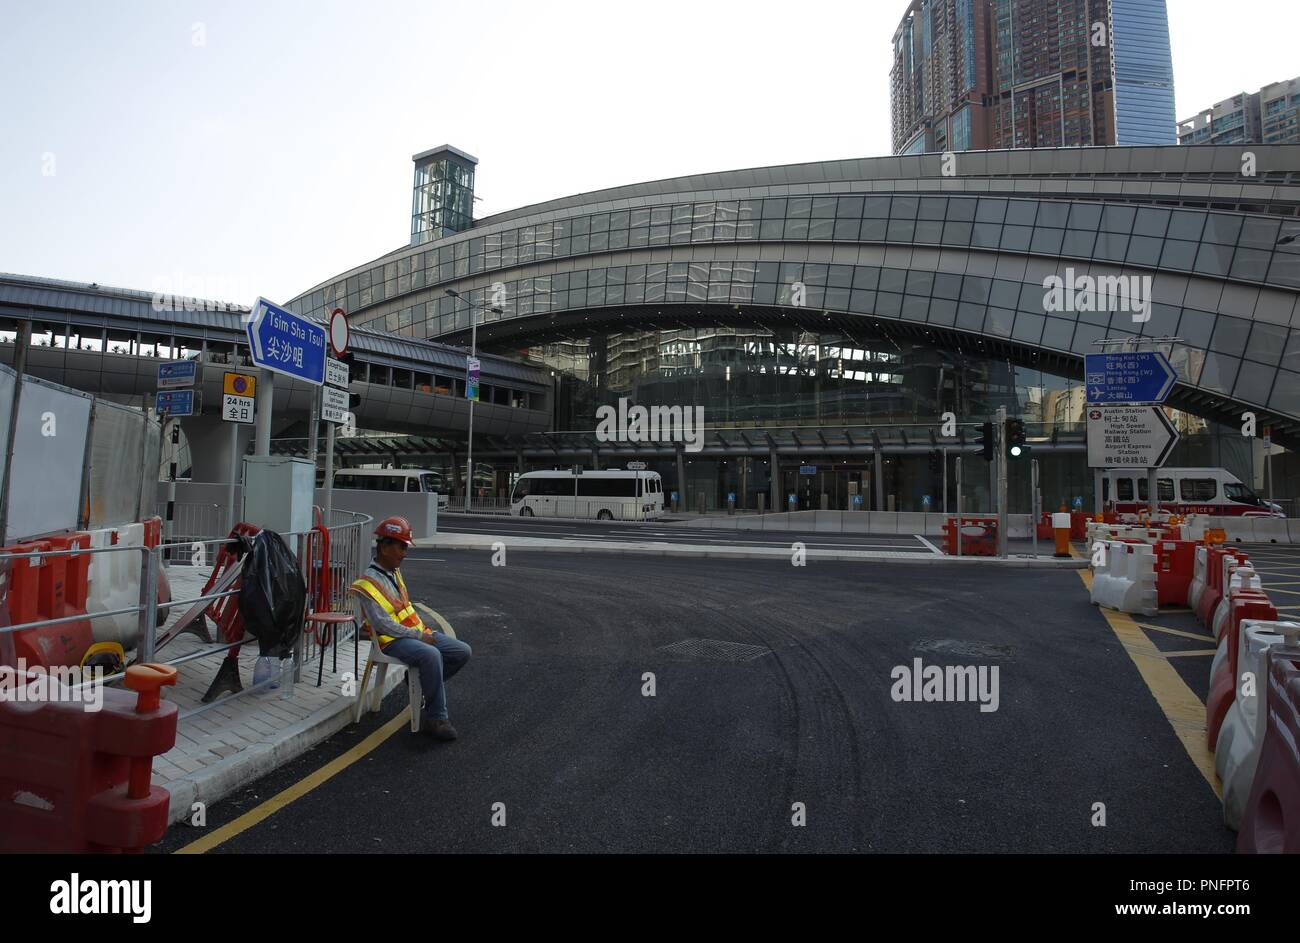 Hong Kong, CHINA. 21st Sep, 2018. Terminal of High Speed Rail at Austin Station awaits quietly for commencement of service of High Speed Rail ( Hong Kong Section ) on 23rd of September 2018 after huge over budget and implementation of Co-Location Arrangement ( or, Joint Immigration Controls ) that stirred up controversy between the government and pro-democratic camps. Sept-21, 2018 Hong Kong.ZUMA/Liau Chung-ren Credit: Liau Chung-ren/ZUMA Wire/Alamy Live News Stock Photo